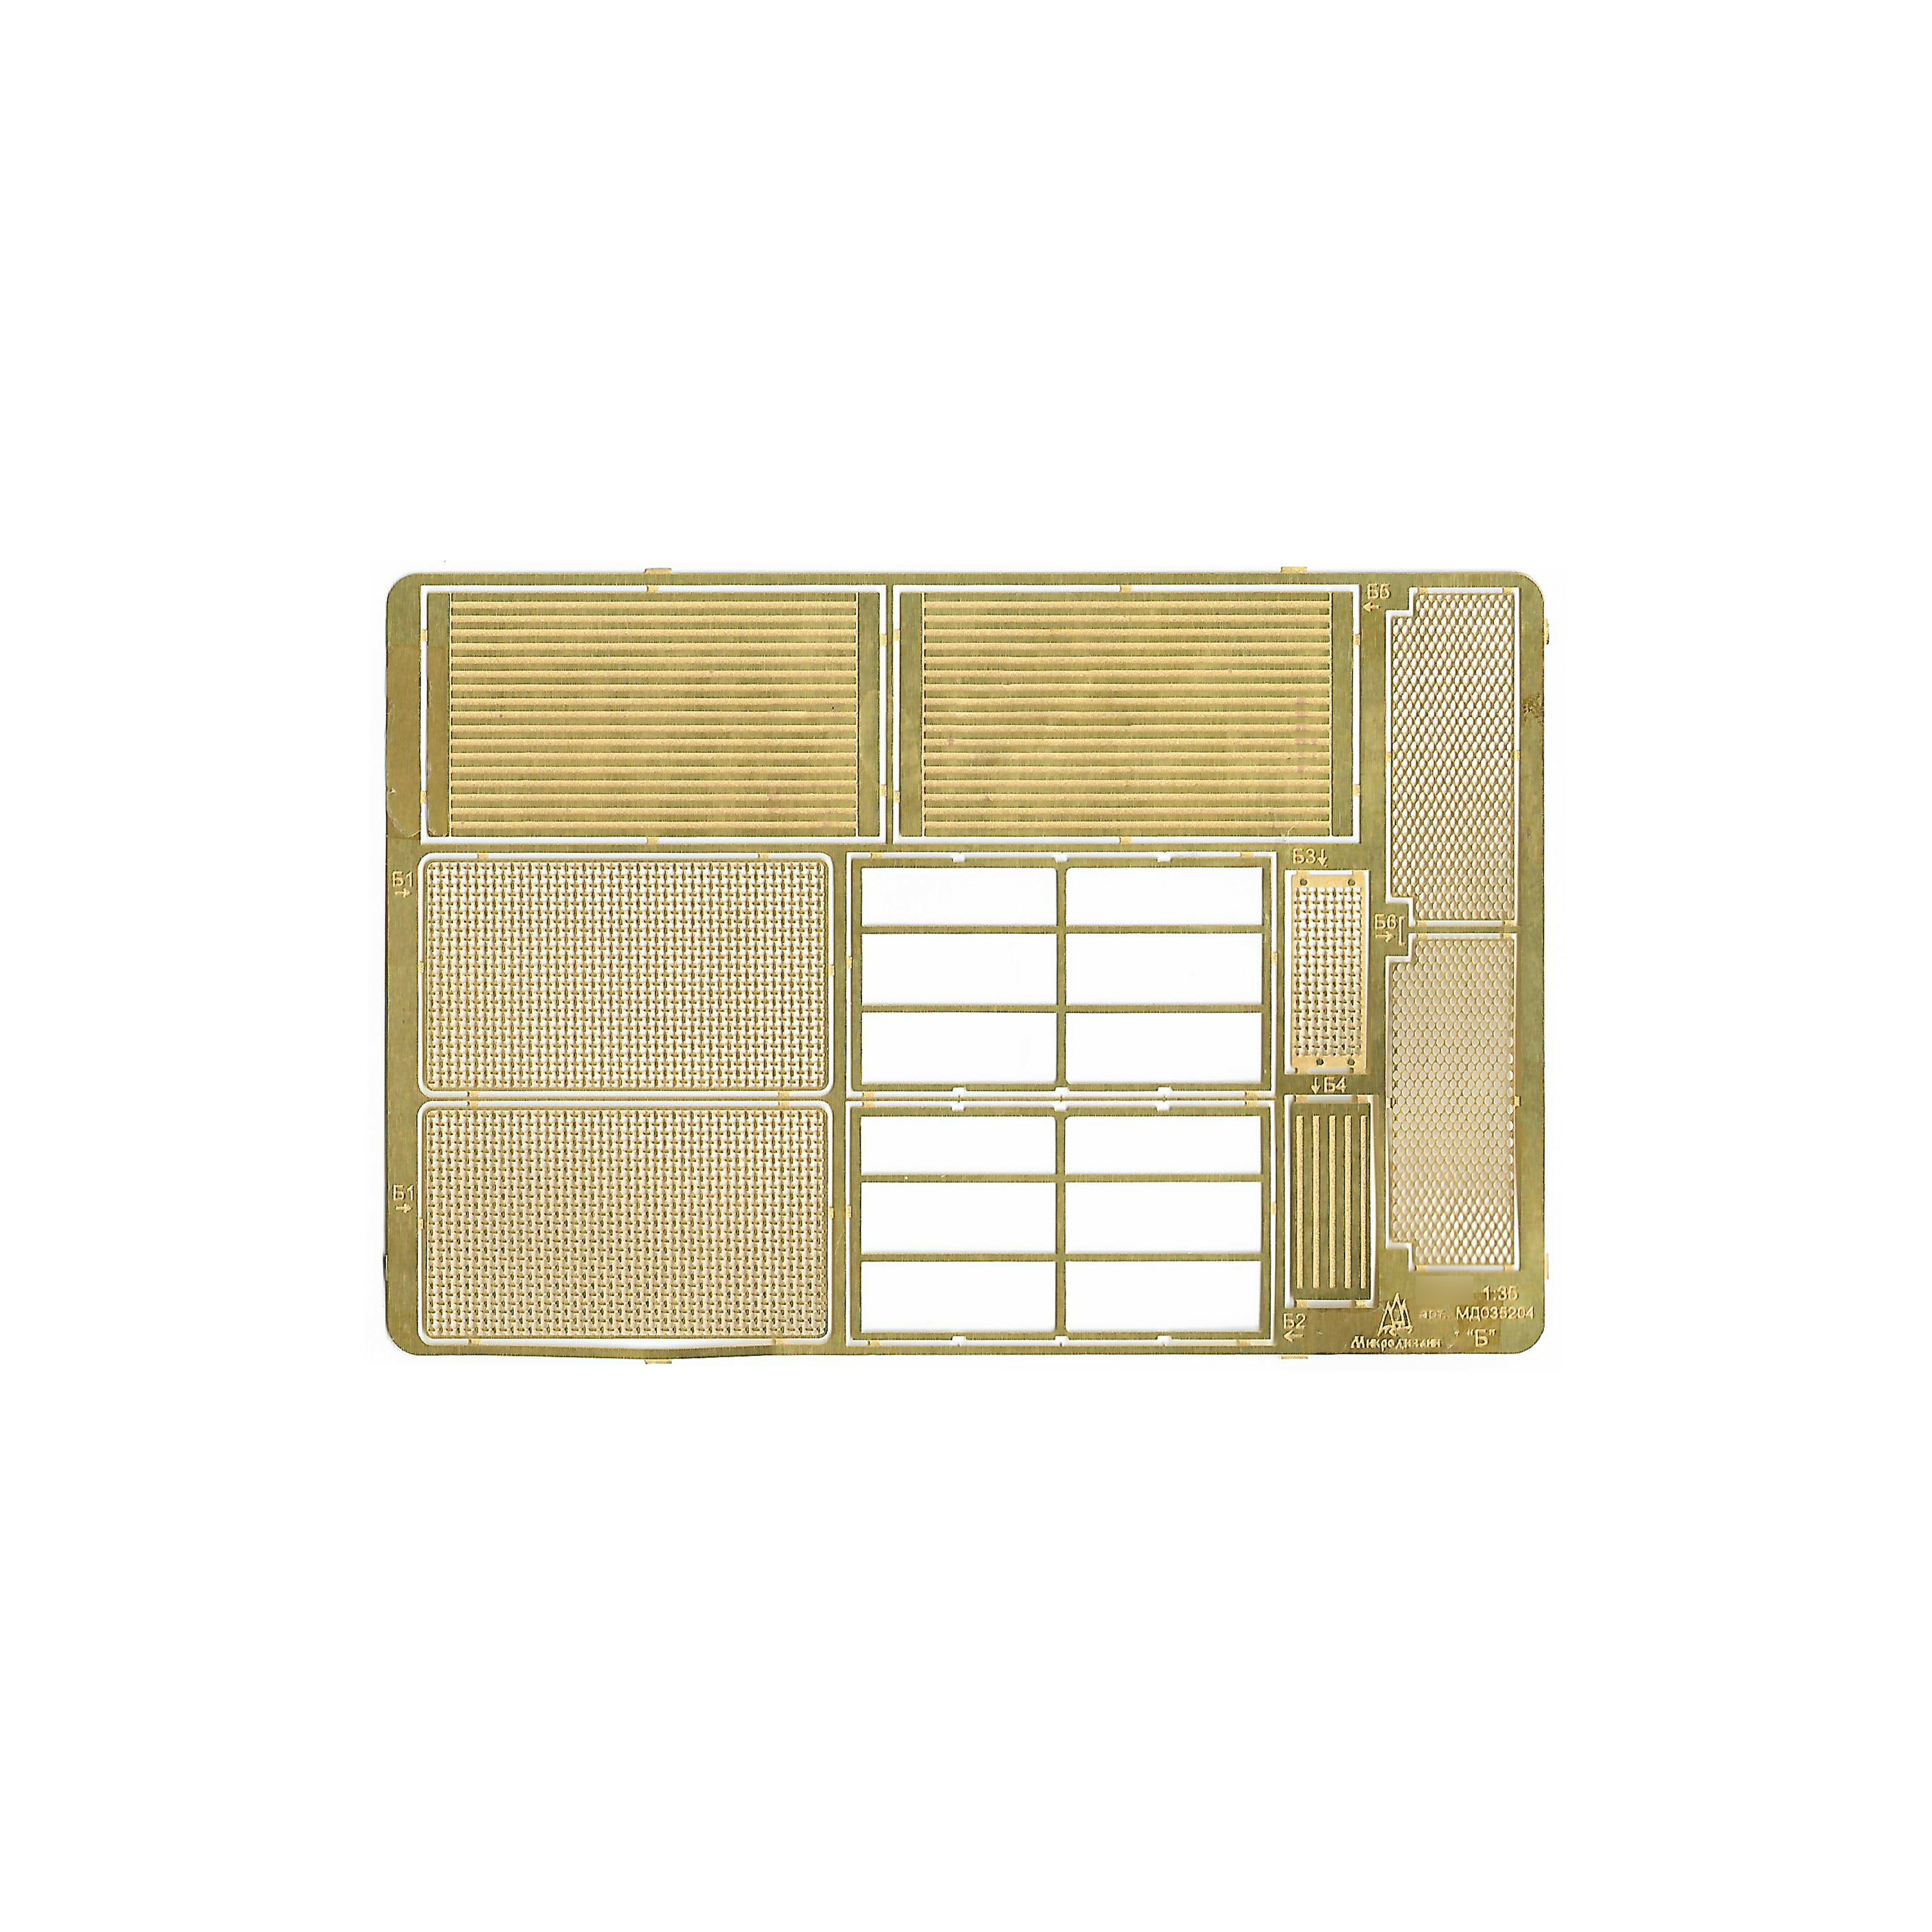 352041 Microdesign 1/35 Mesh and blinds for 90th tank